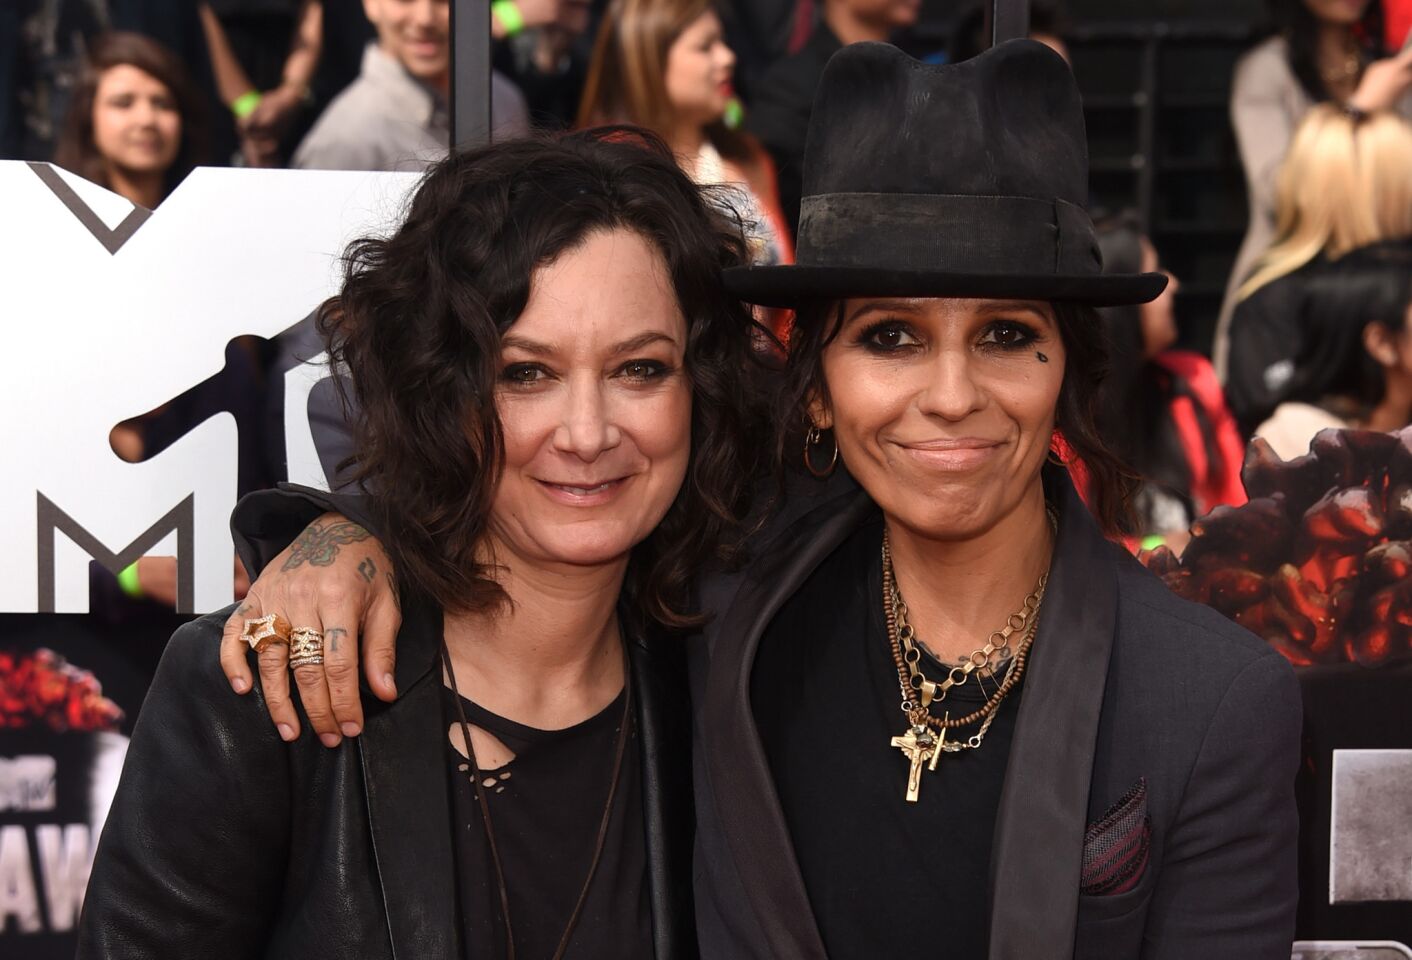 Actress Sara Gilbert and rock musician wife Linda Perry became parents to son Rhodes Emilio Gilbert Perry. Gilbert and Perry tied the knot in March 2014 after dating for three years. Gilbert has two children from a previous relationship with TV producer Ali Adler.